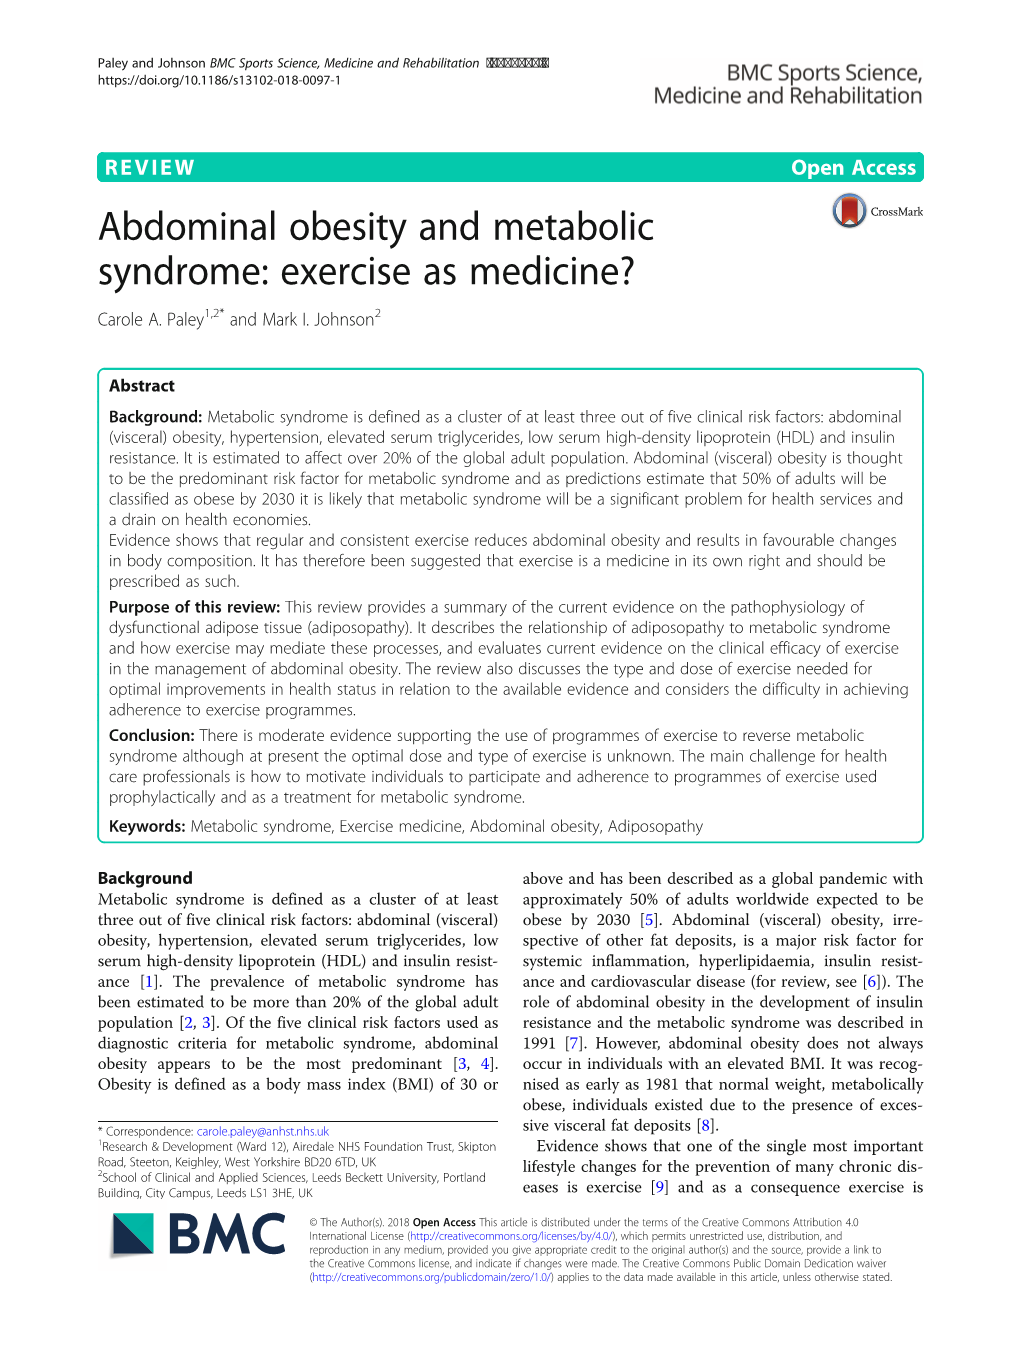 Abdominal Obesity and Metabolic Syndrome: Exercise As Medicine? Carole A